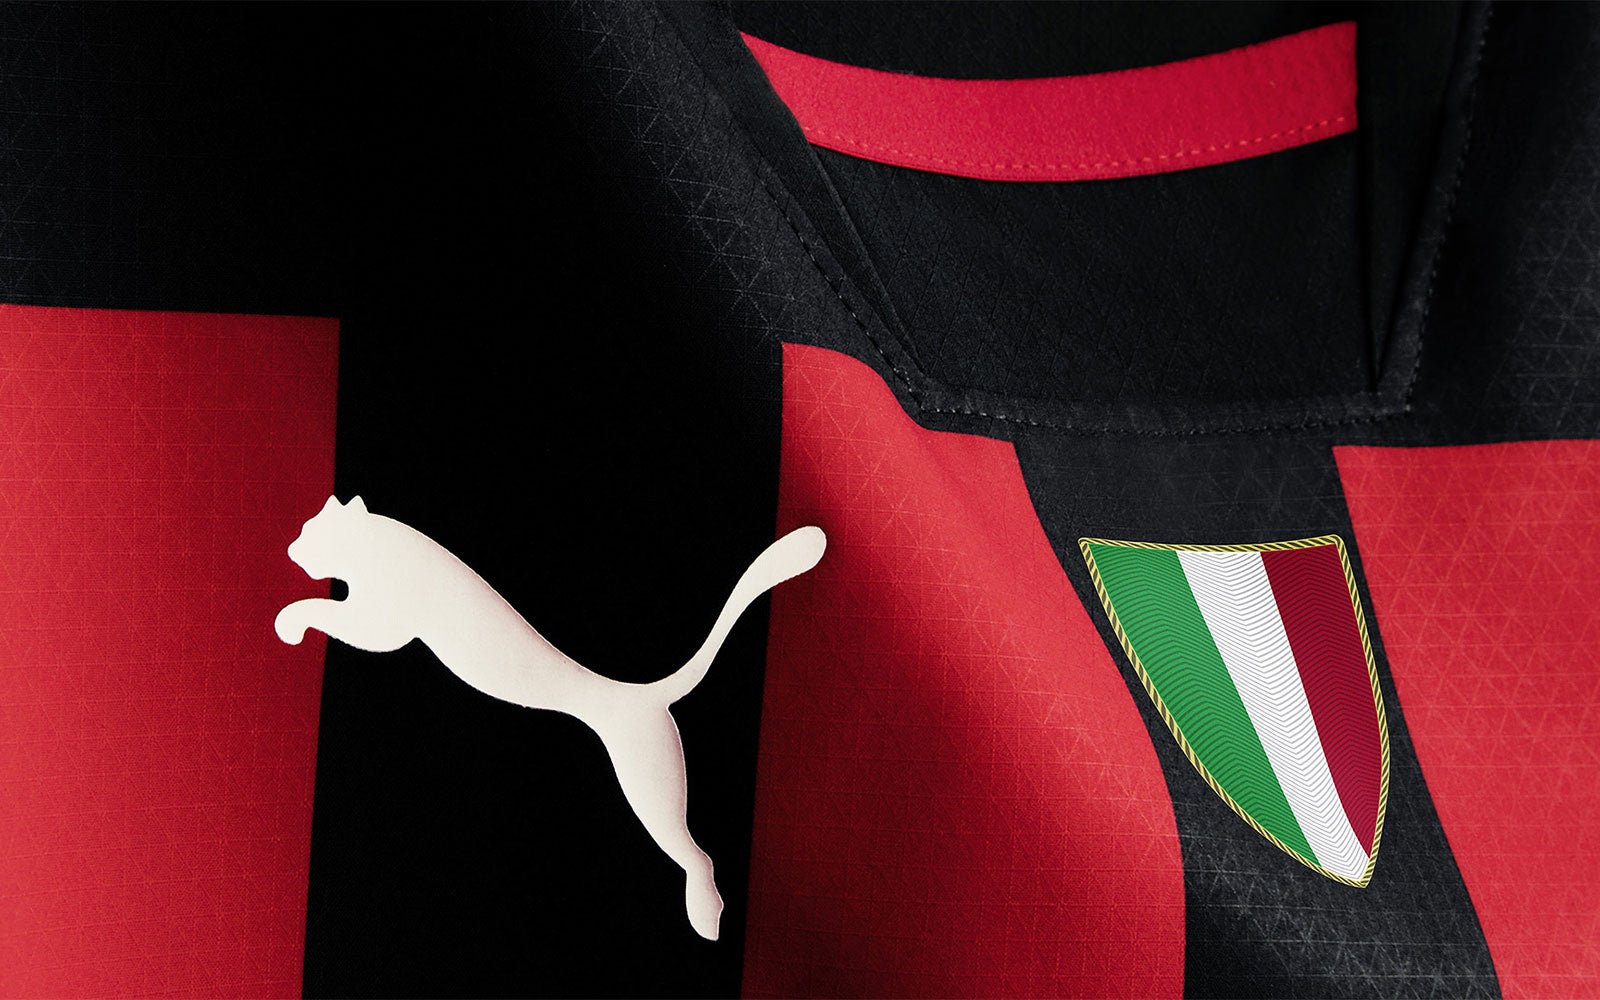 Puma and AC Milan launch new 2022/23 Home Kit